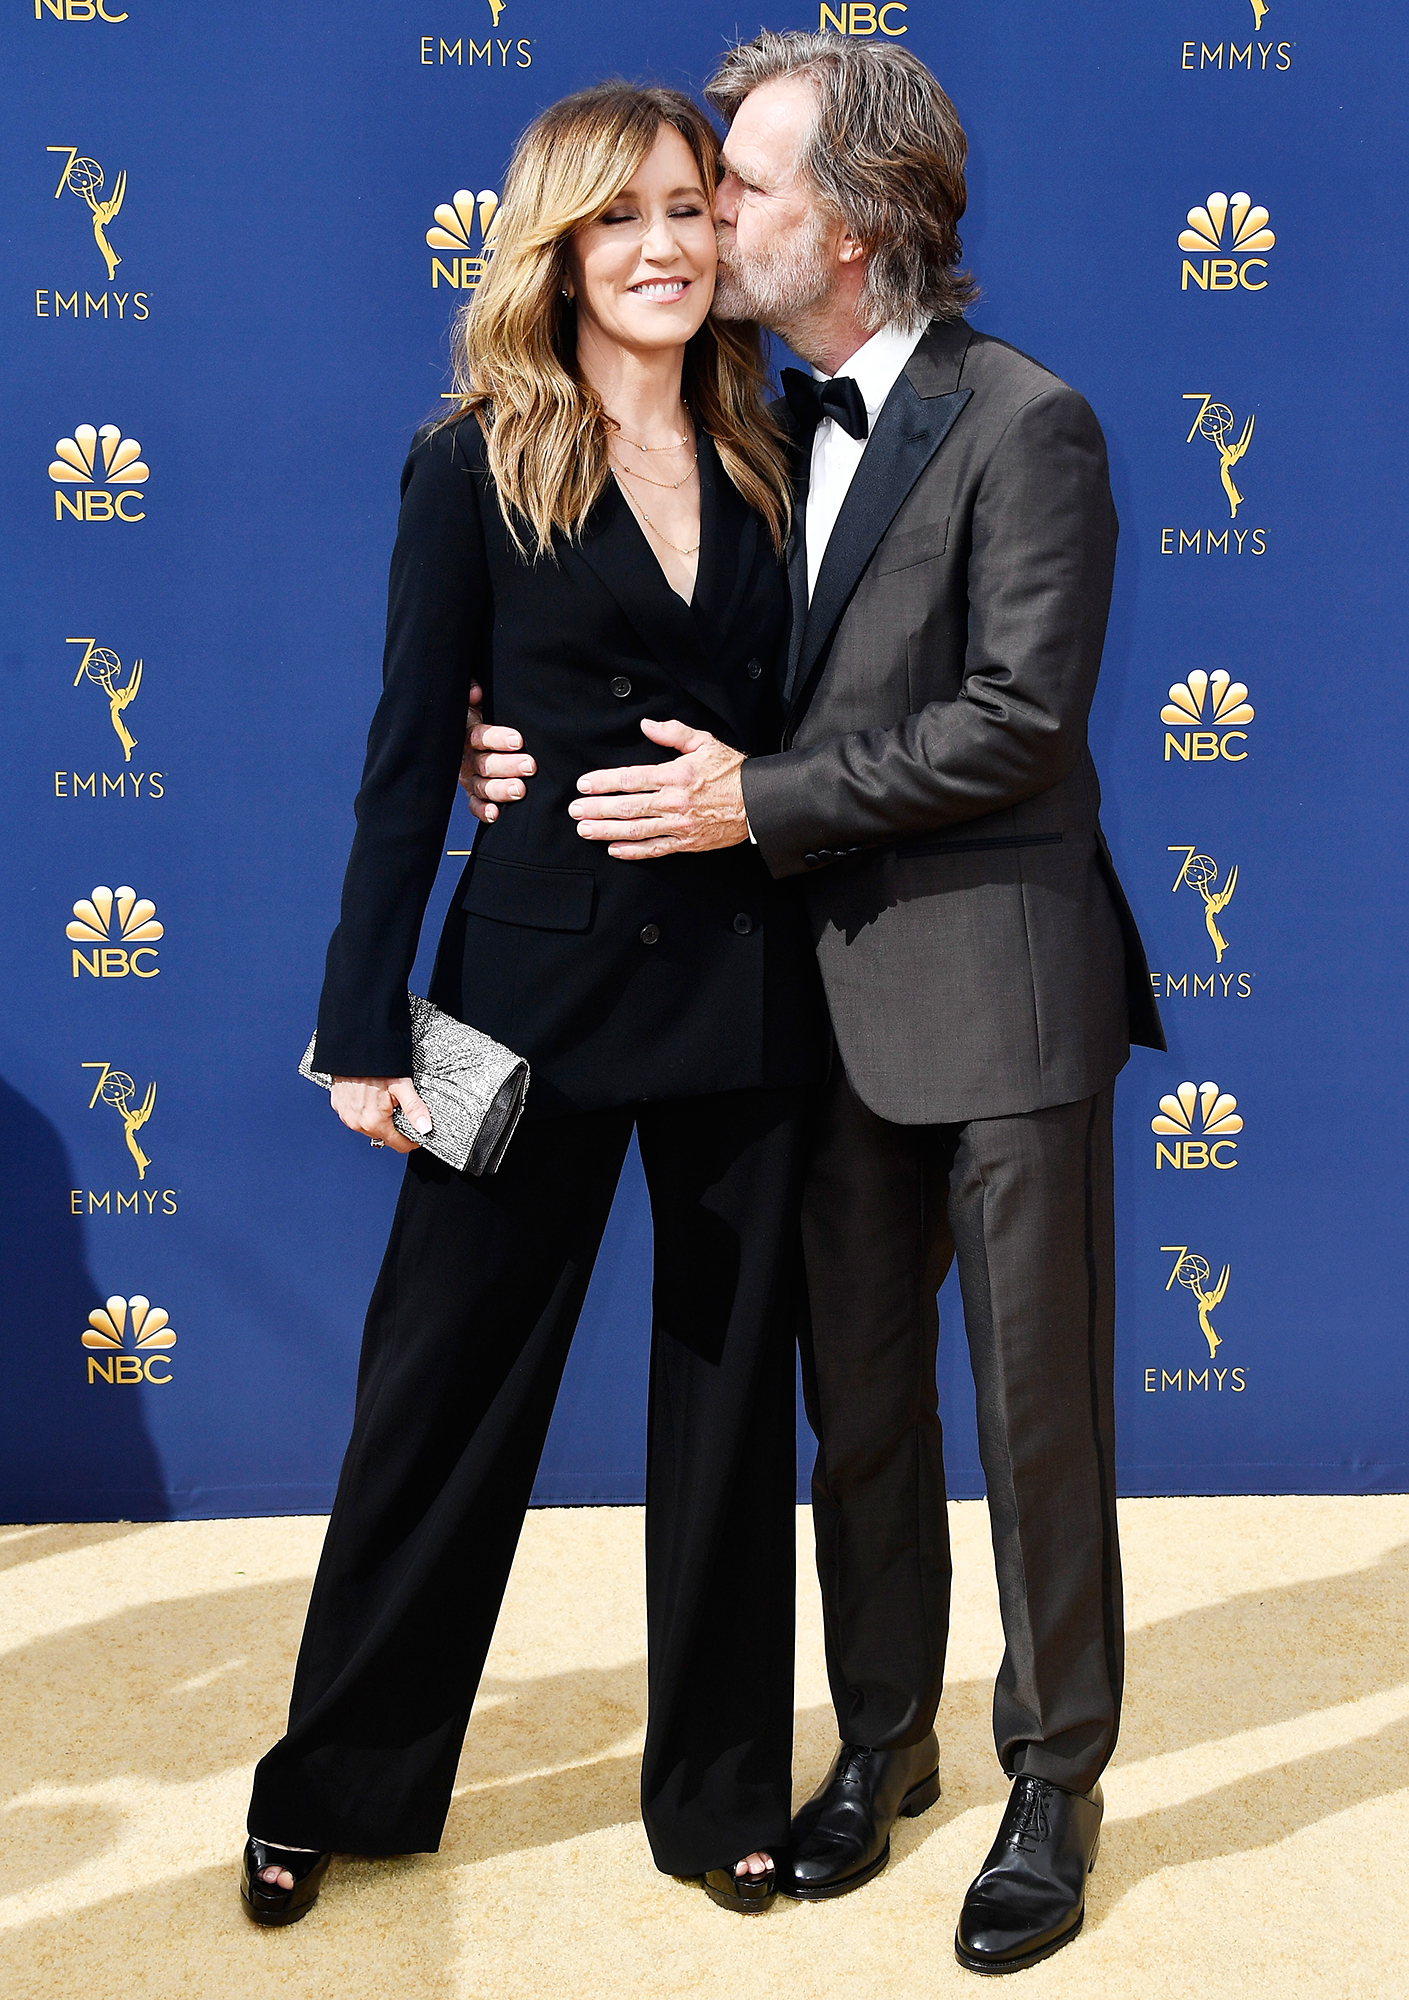 Felicity Huffman William H. Macy Emmys 2018